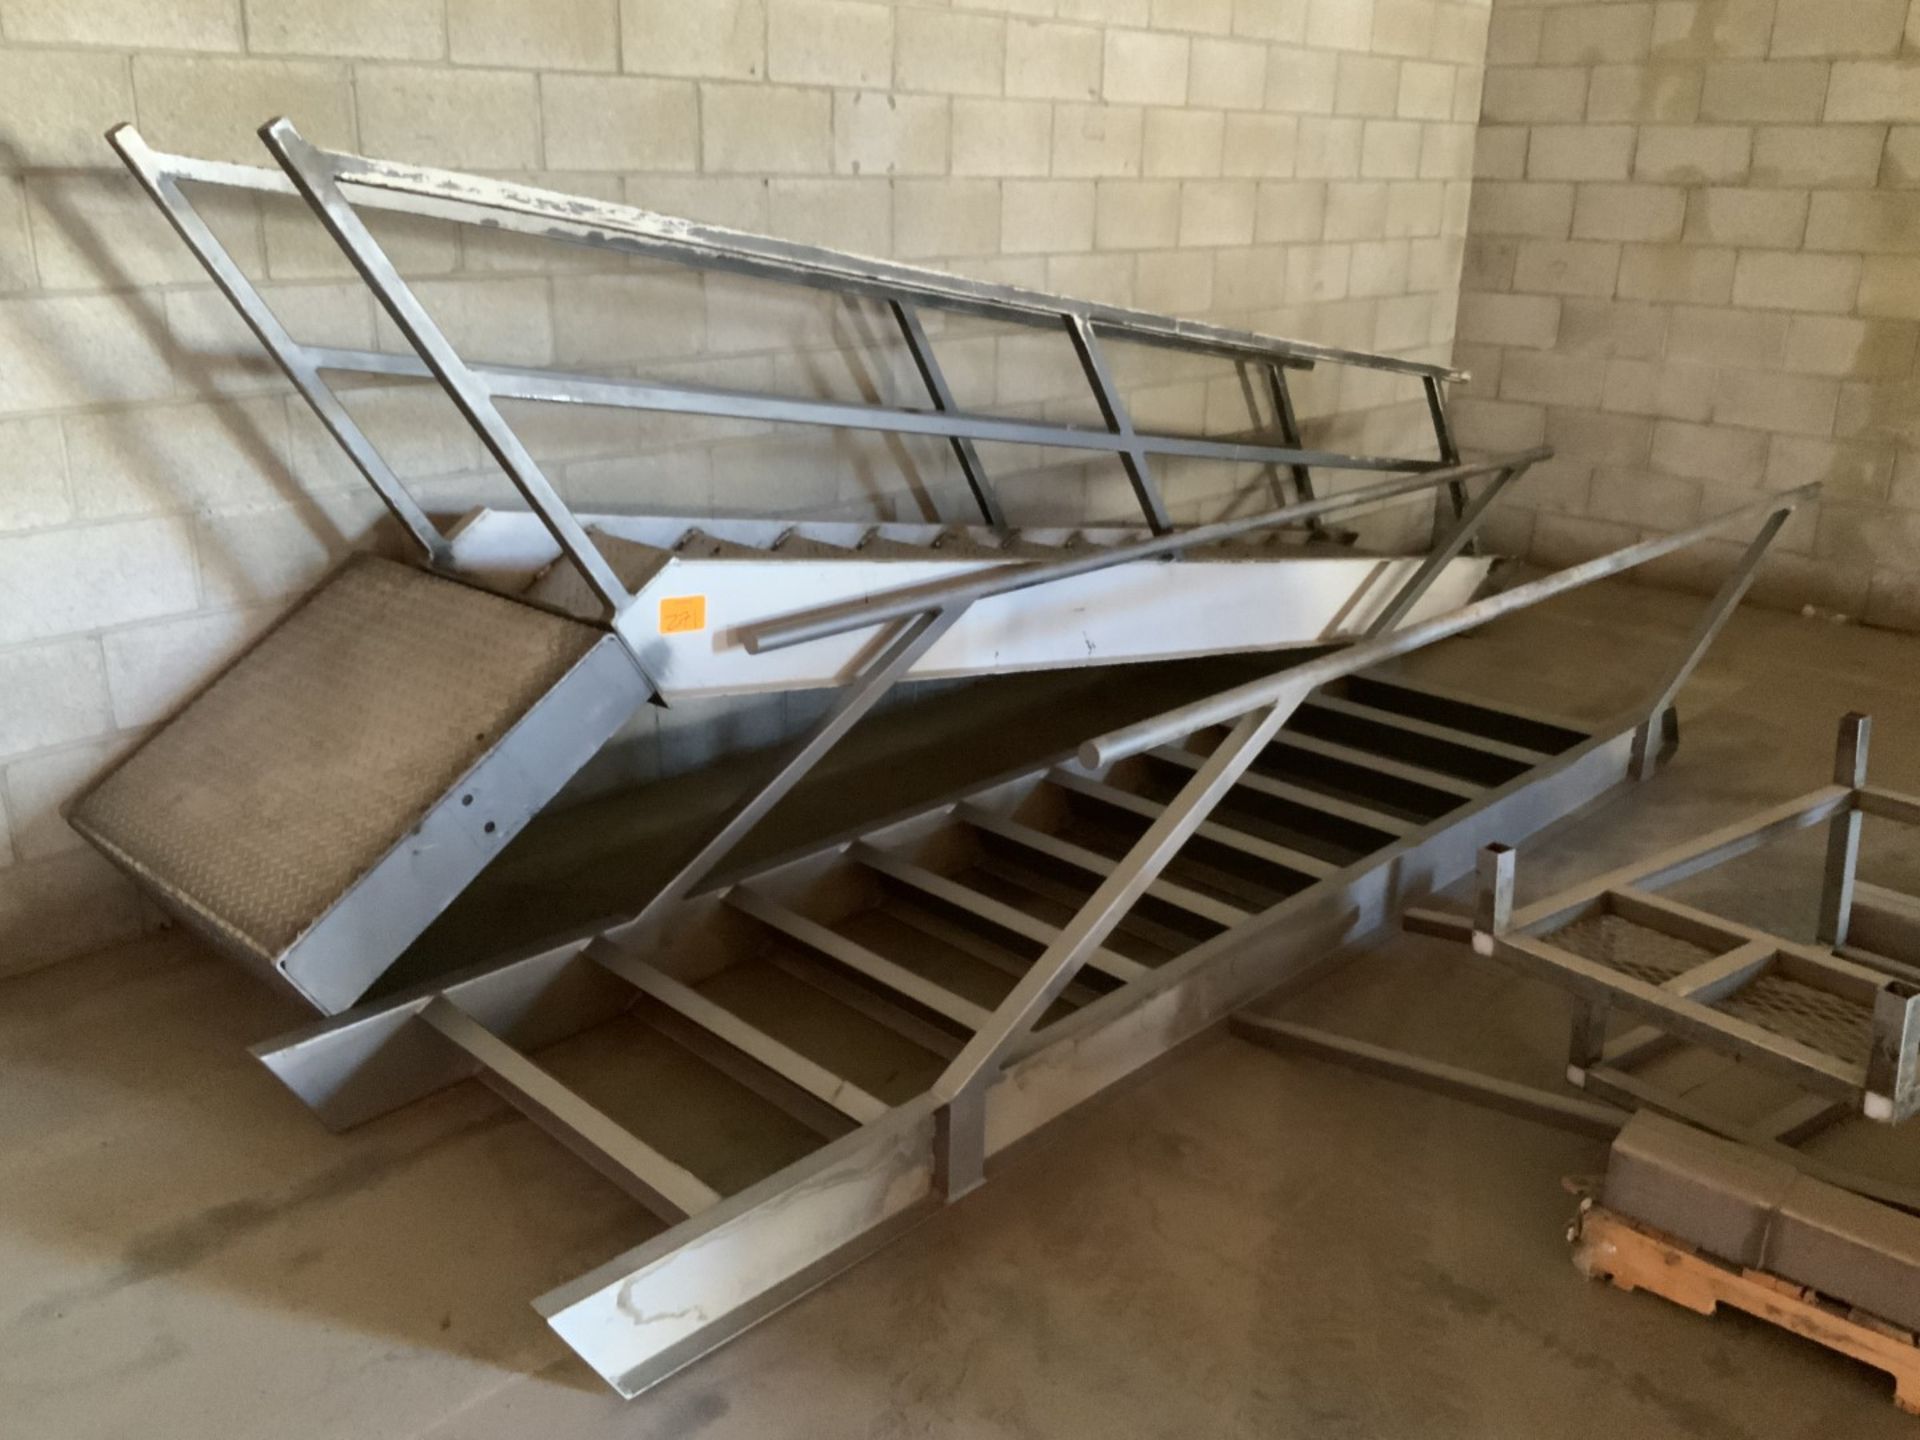 Stainless Stairs